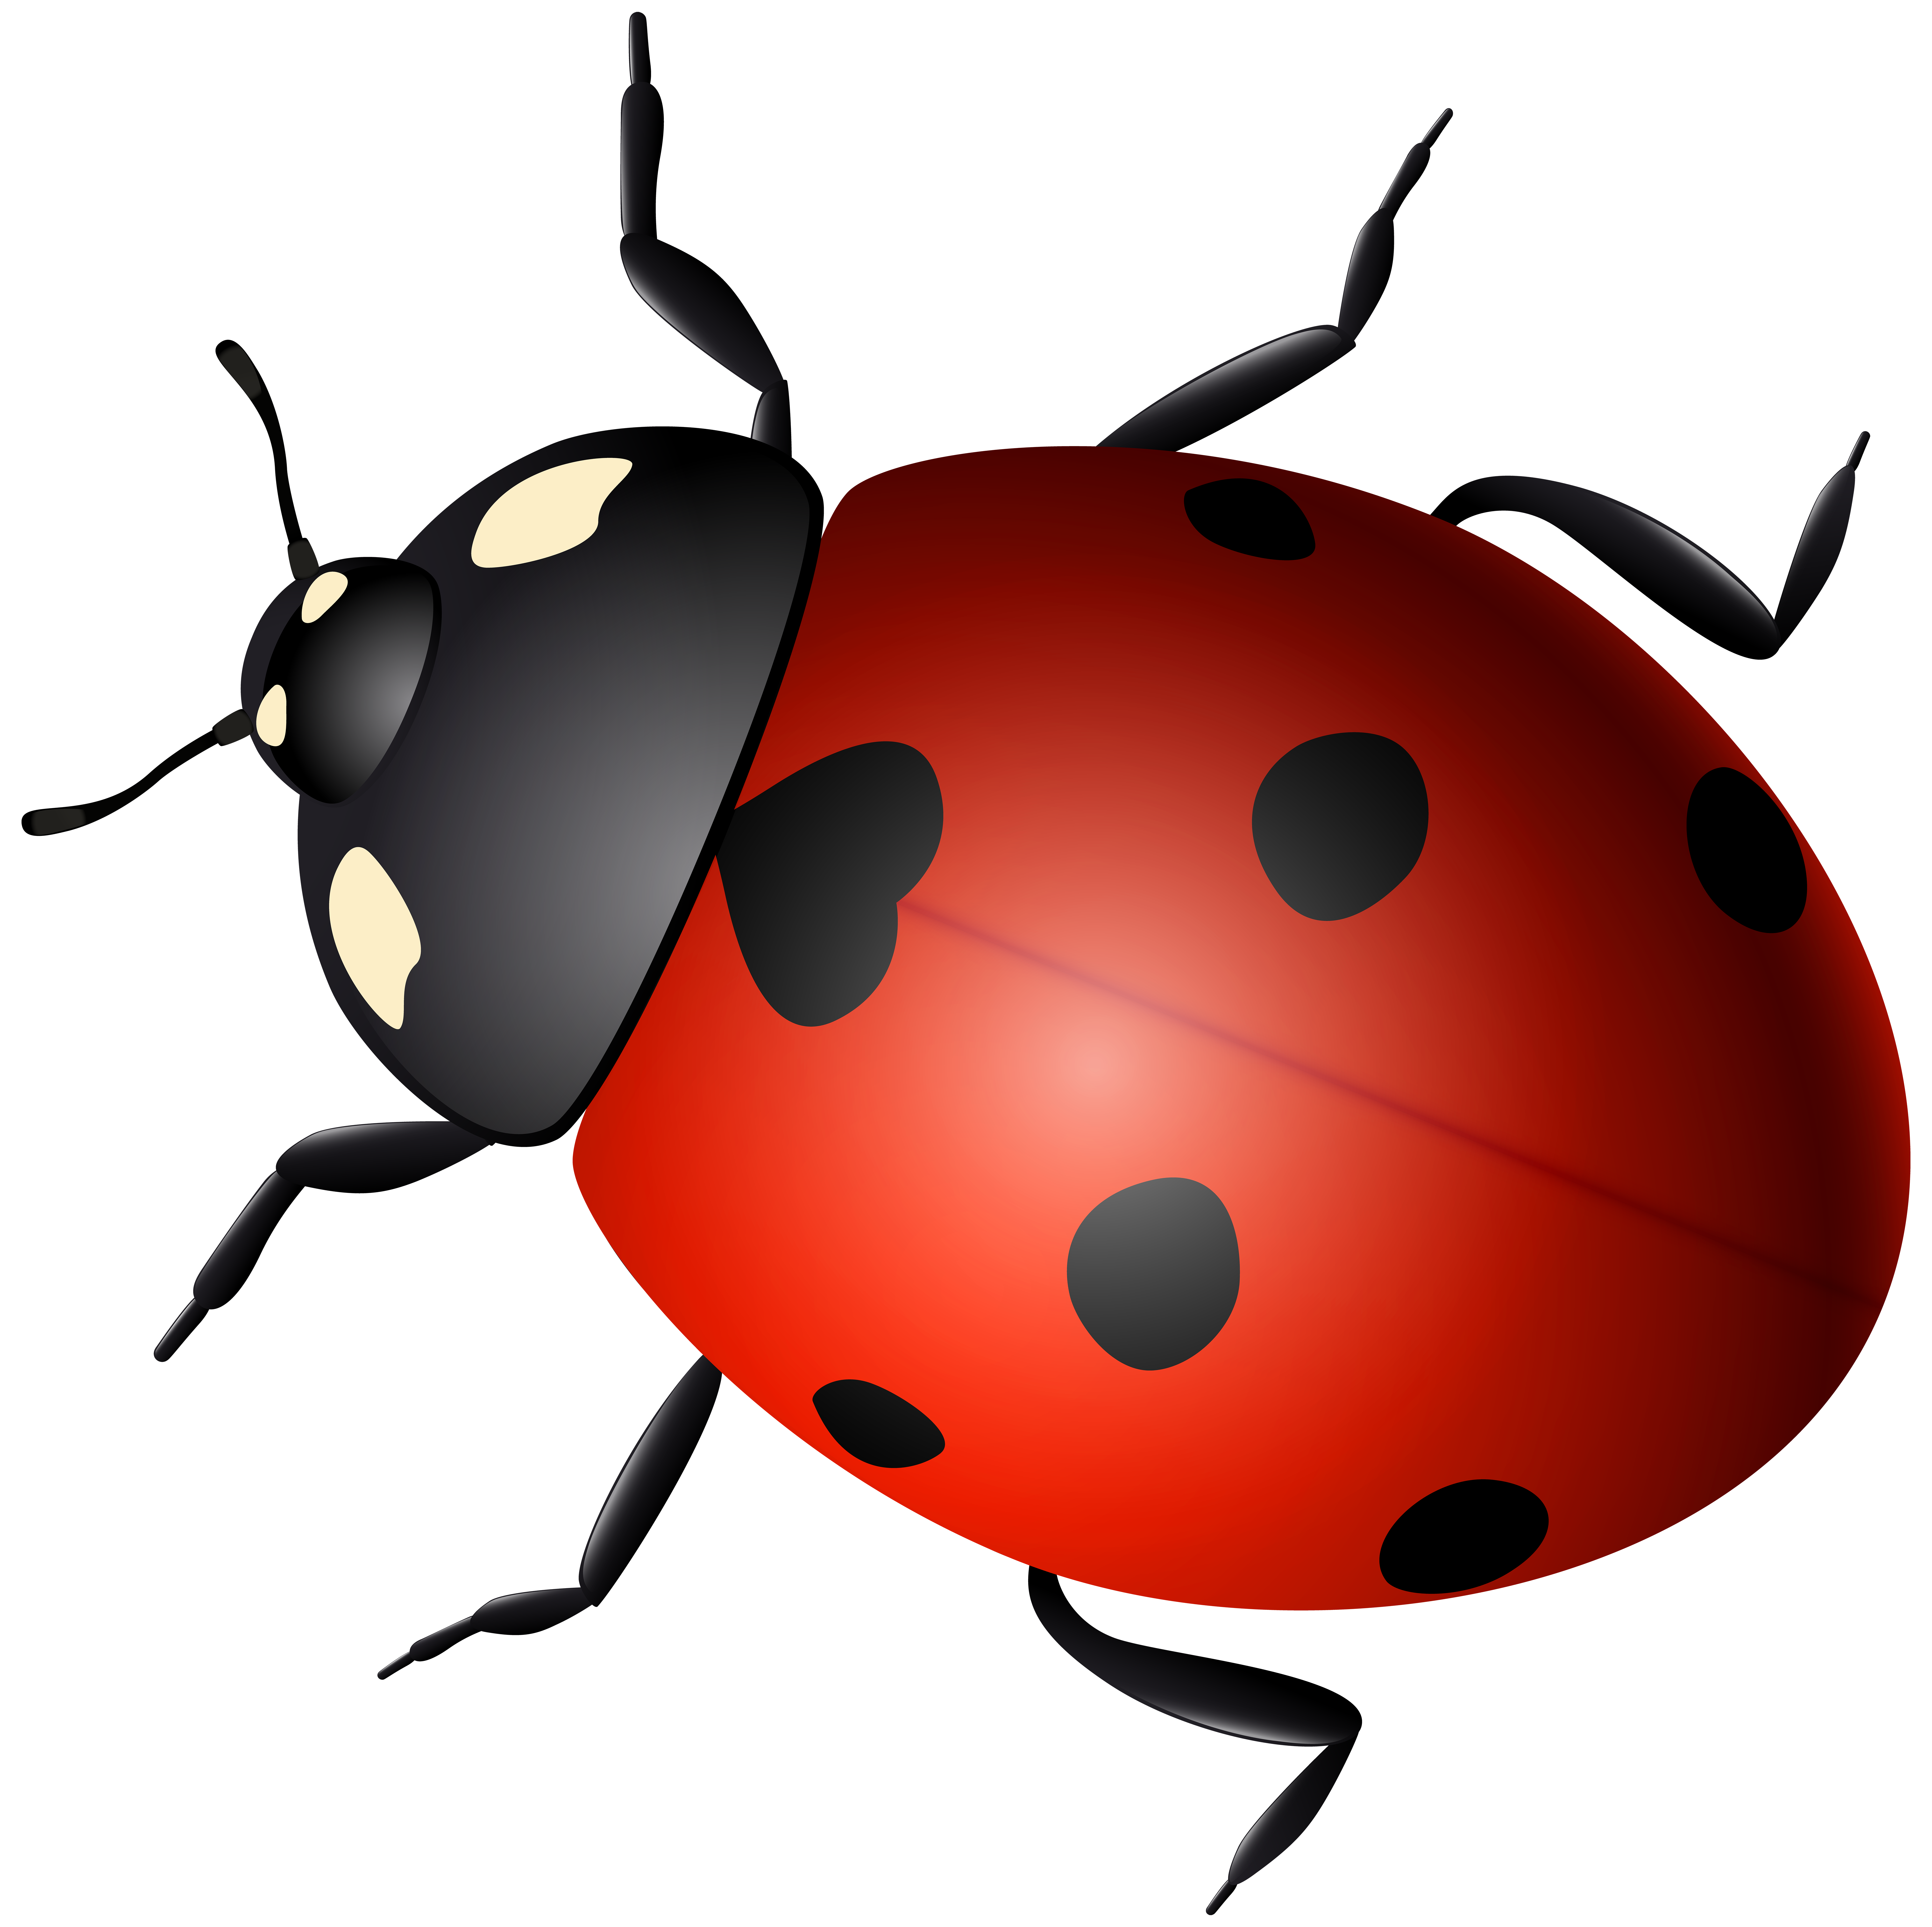 Ladybug Decorative Transparent Image Gallery Yopriceville High Quality Images And Transparent Png Free Clipart